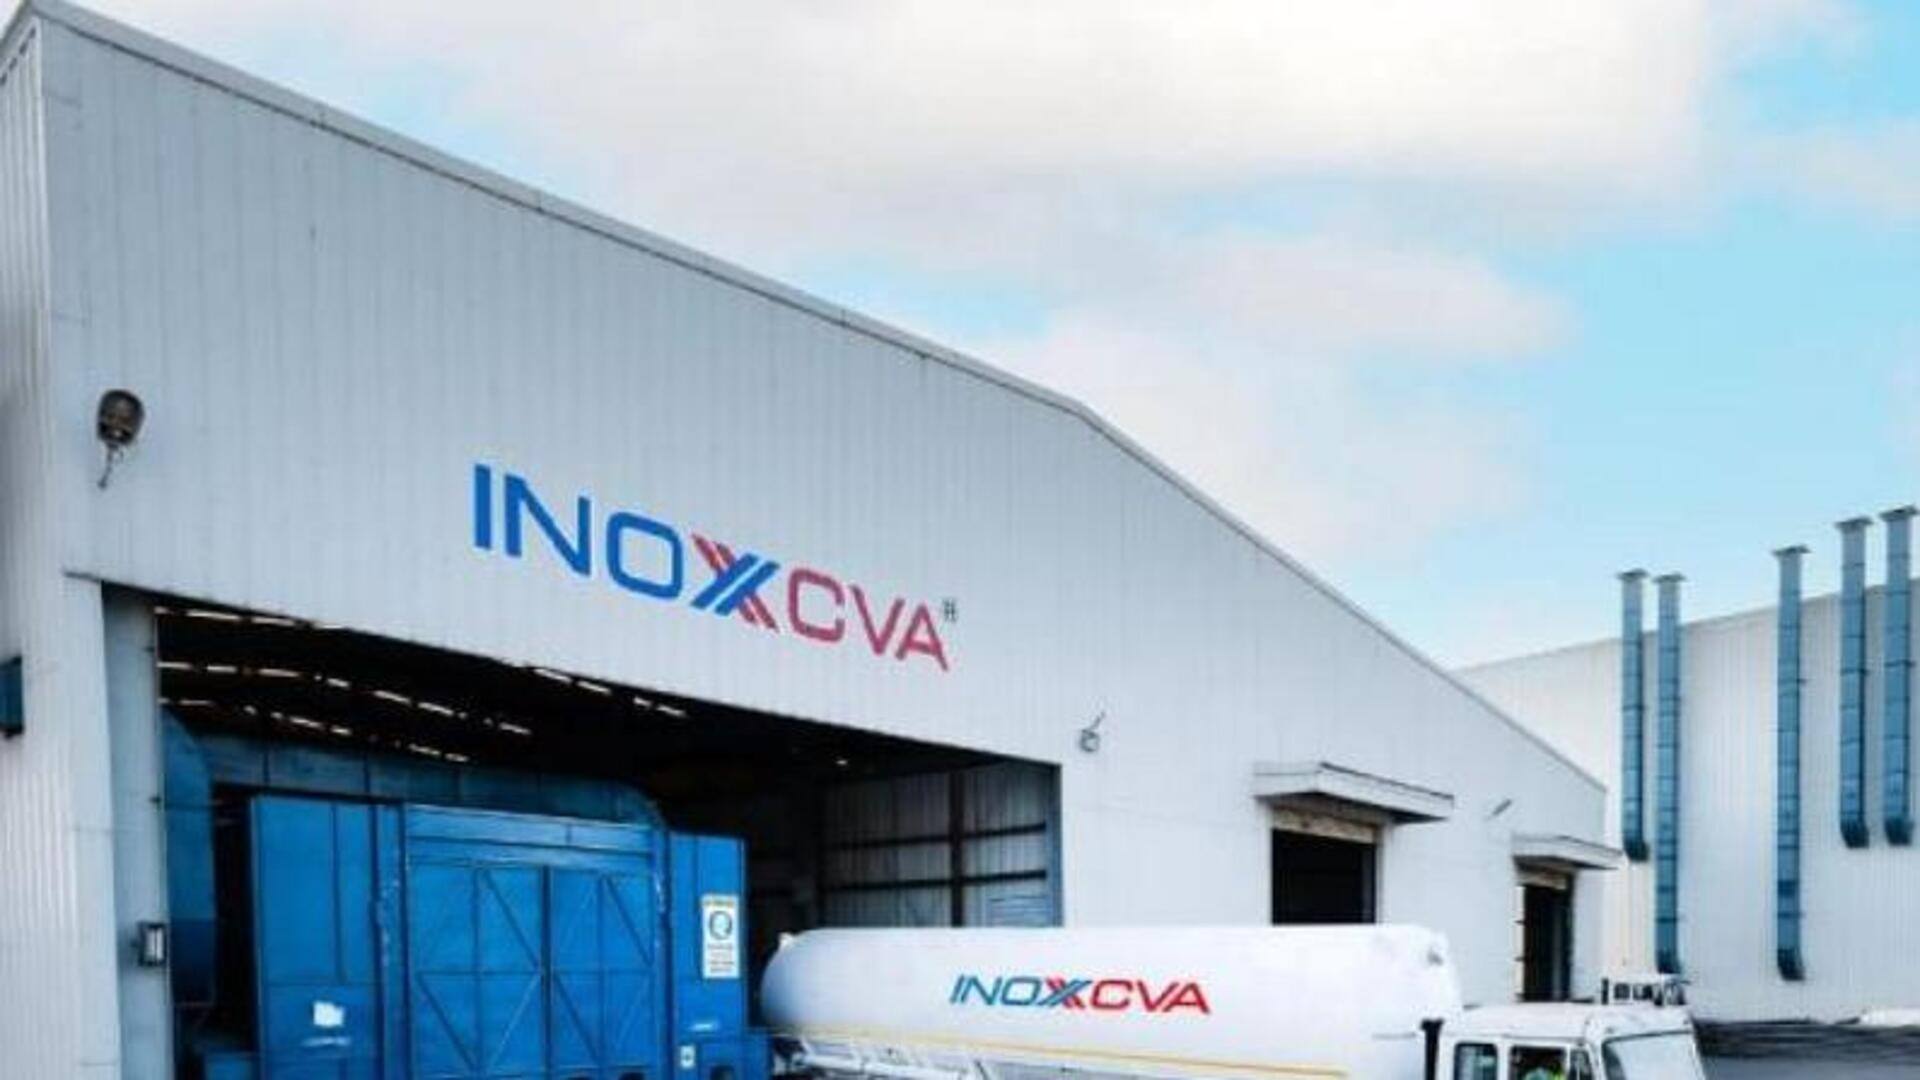 INOX India lists at Rs. 950, 44% above issue price  